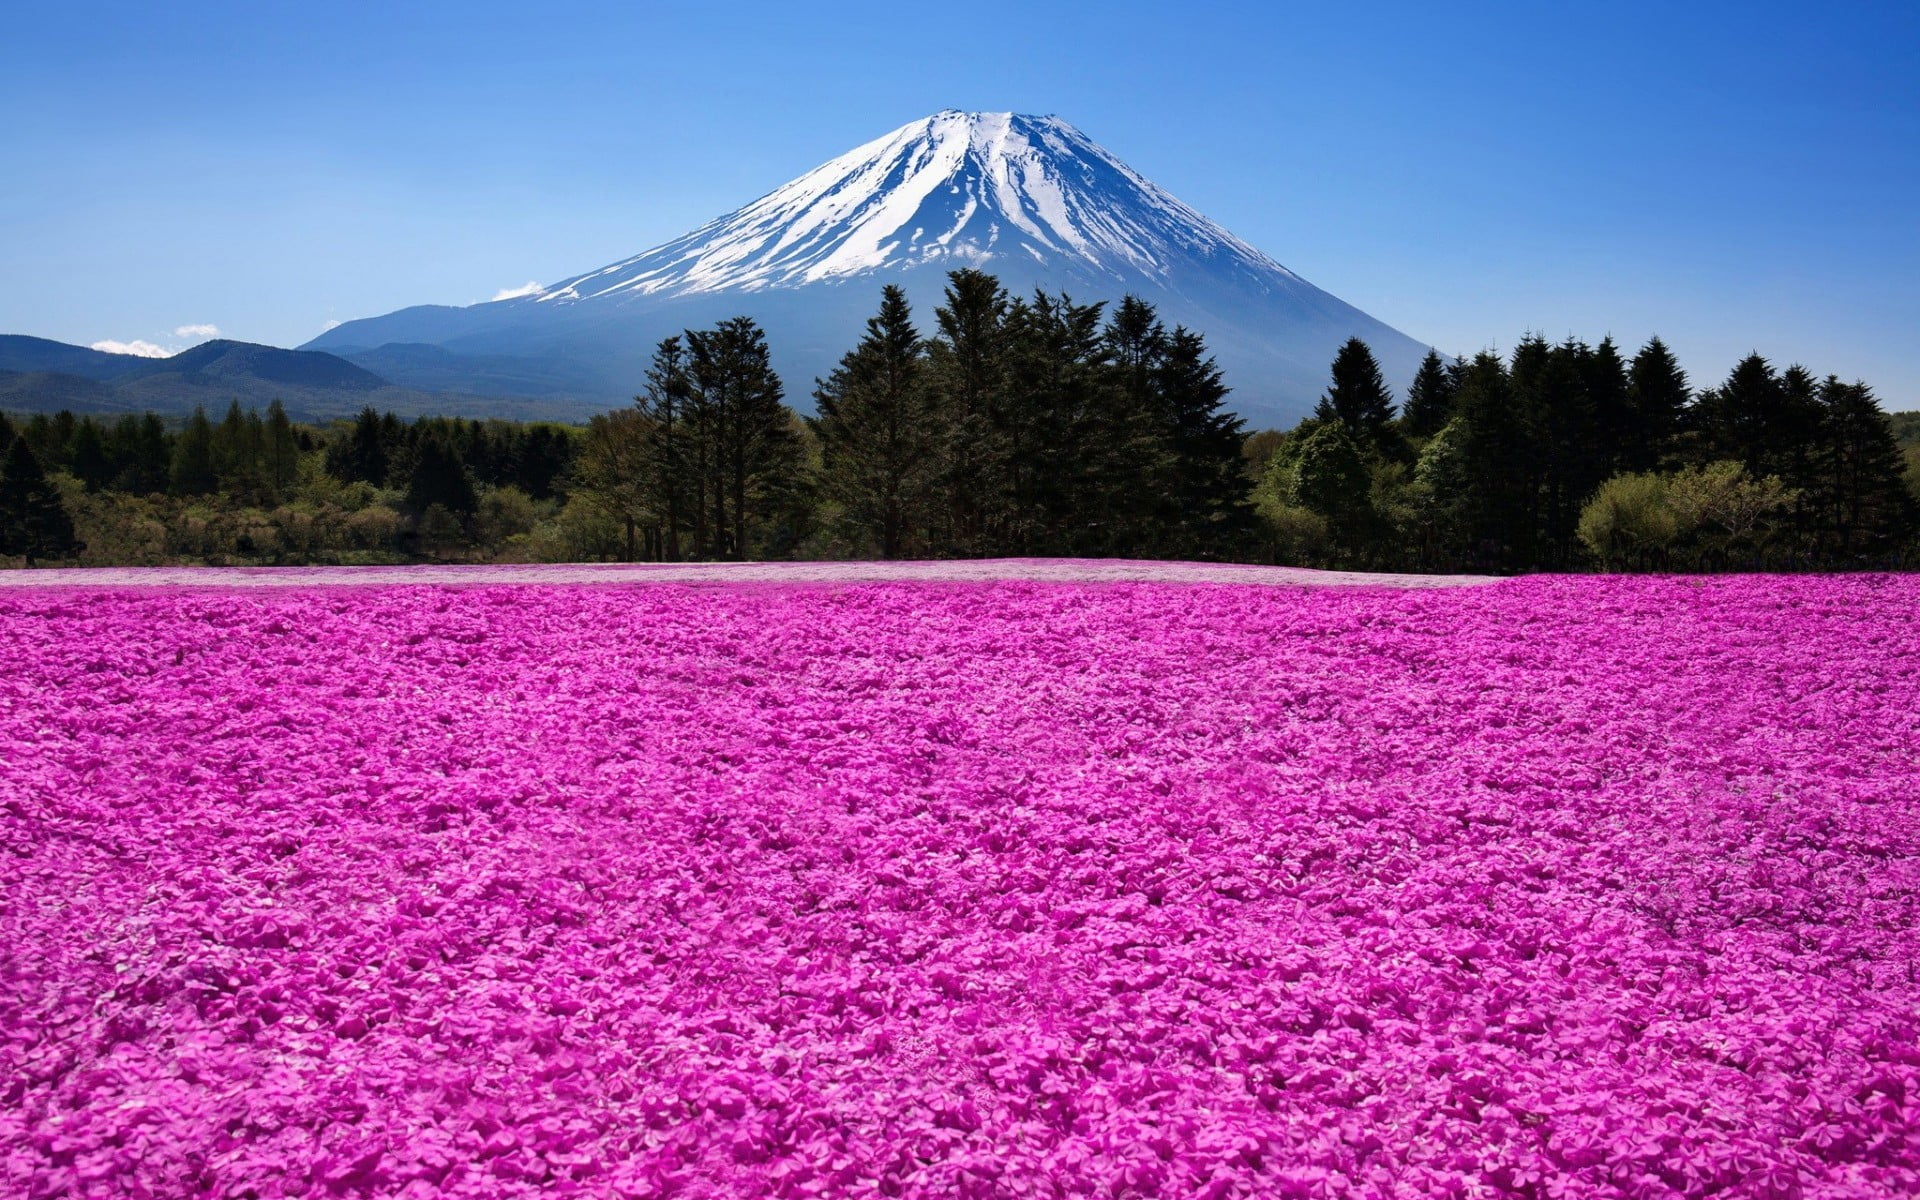 purple petaled bed of flowers, nature, landscape, mountains, trees